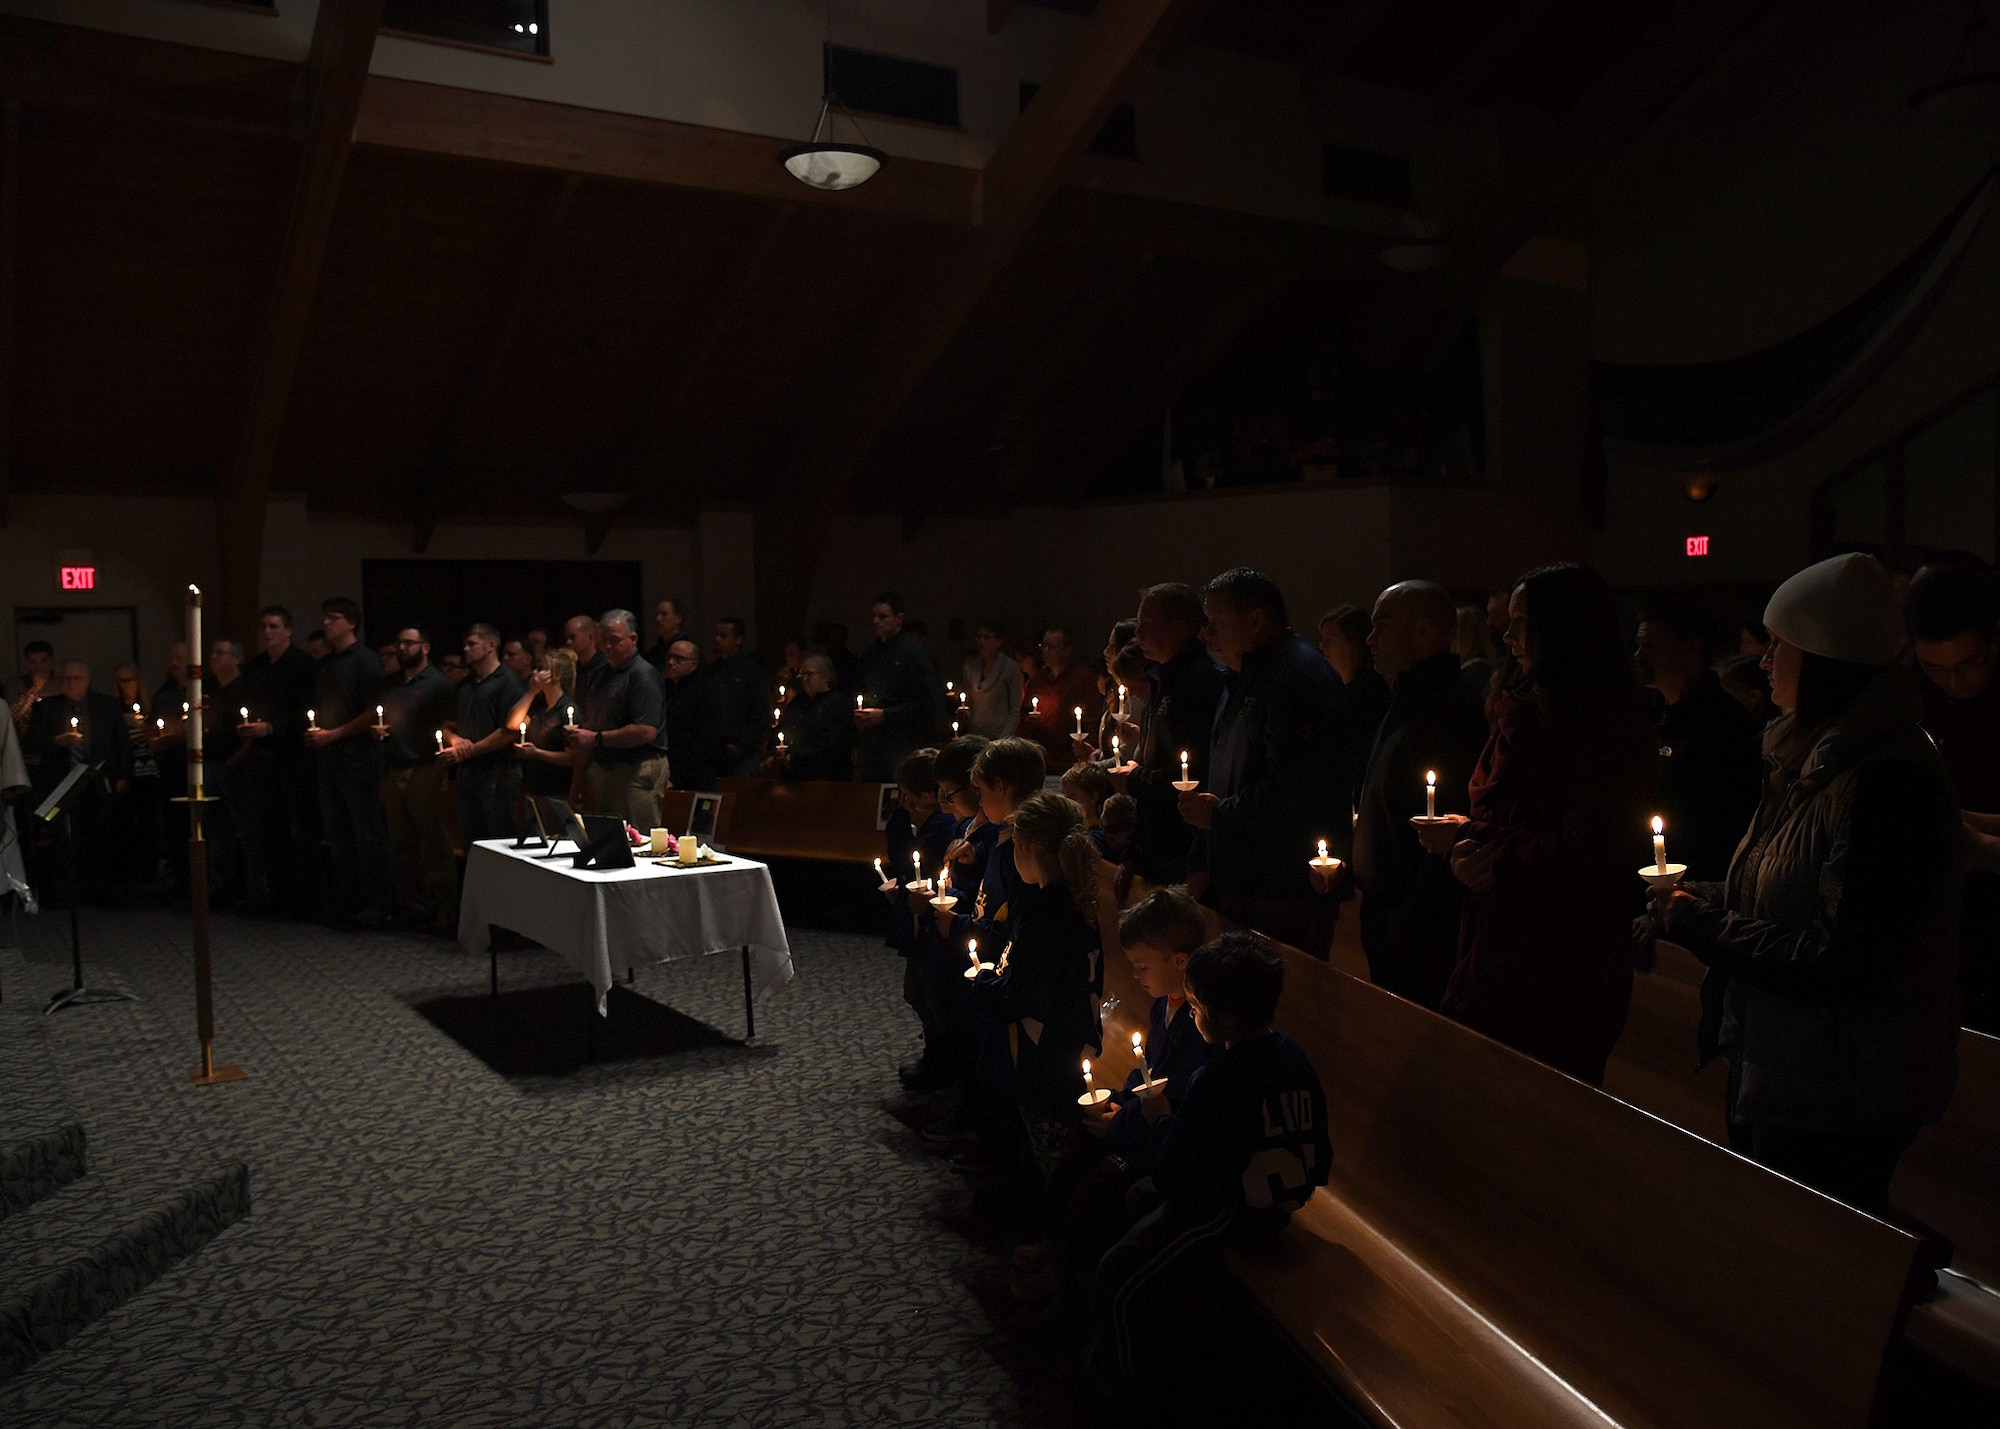 A crowd of nearly 100 people to include families, friends and coworkers from Grand Forks Air Force Base, the Manvel Fire Department and members of the local communities, stand in silence to honor the memories of the Dean family during a vigil hosted November 28, 2018, in St. Timothy’s Catholic Church, in Manvel, North Dakota. Staff Sgt. Anthony James Dean, his wife Chelsi Kay Dean, and their two children Kaytlin Merie Dean, 5, and Avri James Dean, 1, were all killed in a vehicle accident during the Thanksgiving holiday near Billings, Montana. The family was spoken of with love, and remembered by the stories shared of their significant involvement in the community. (U.S. photo by Airman 1st Class Elora J. Martinez)